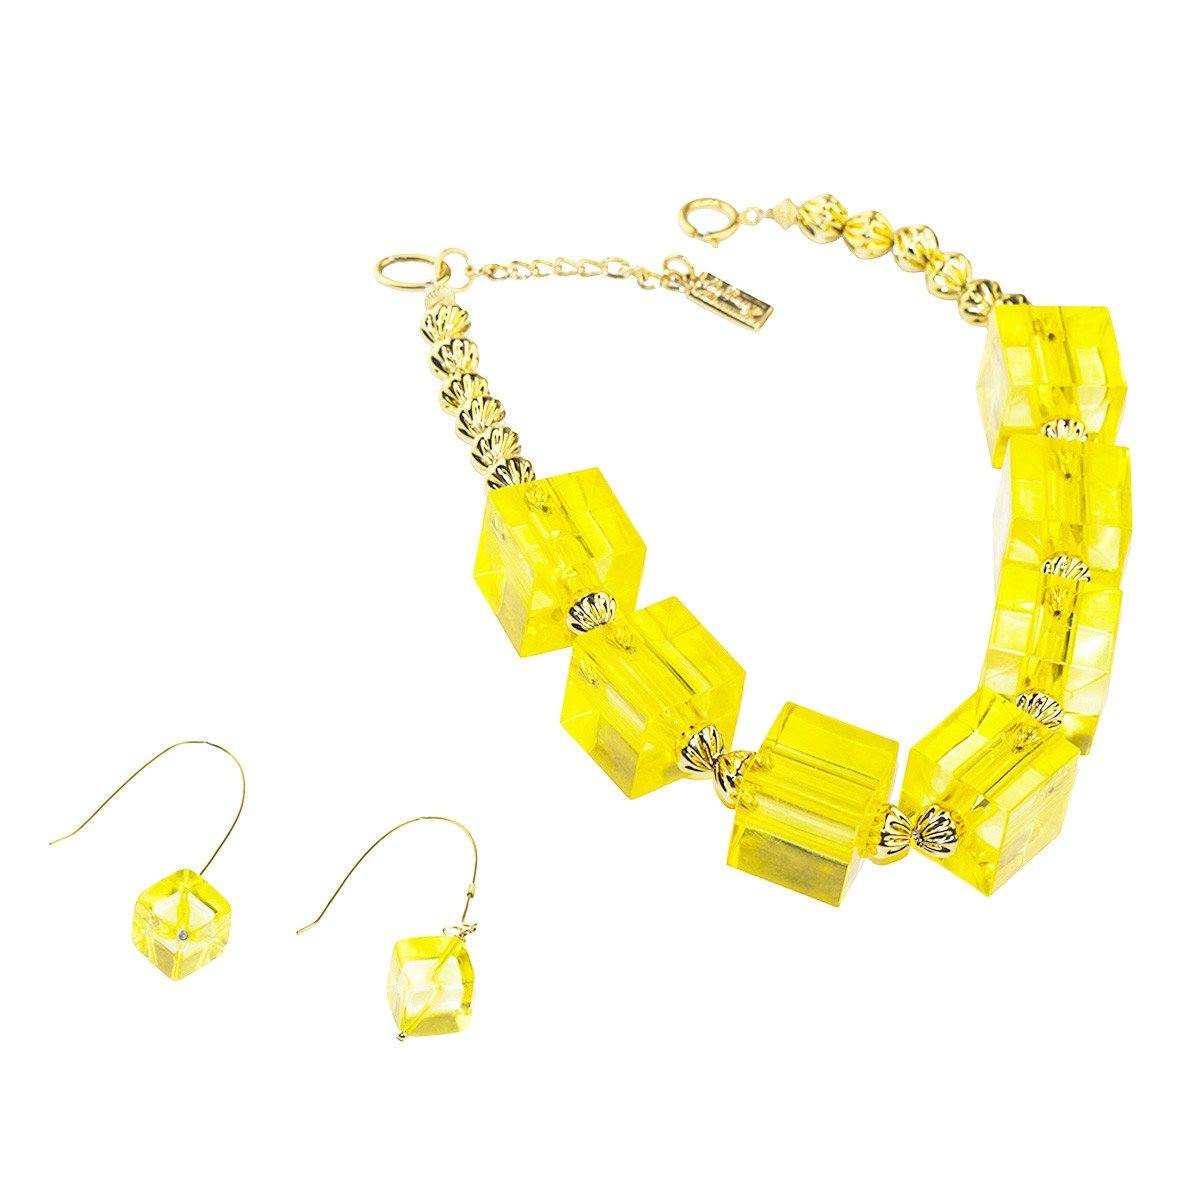 Yellow Lucite Cube Choker Necklace & Pierced Earrings by Anthony Alexander